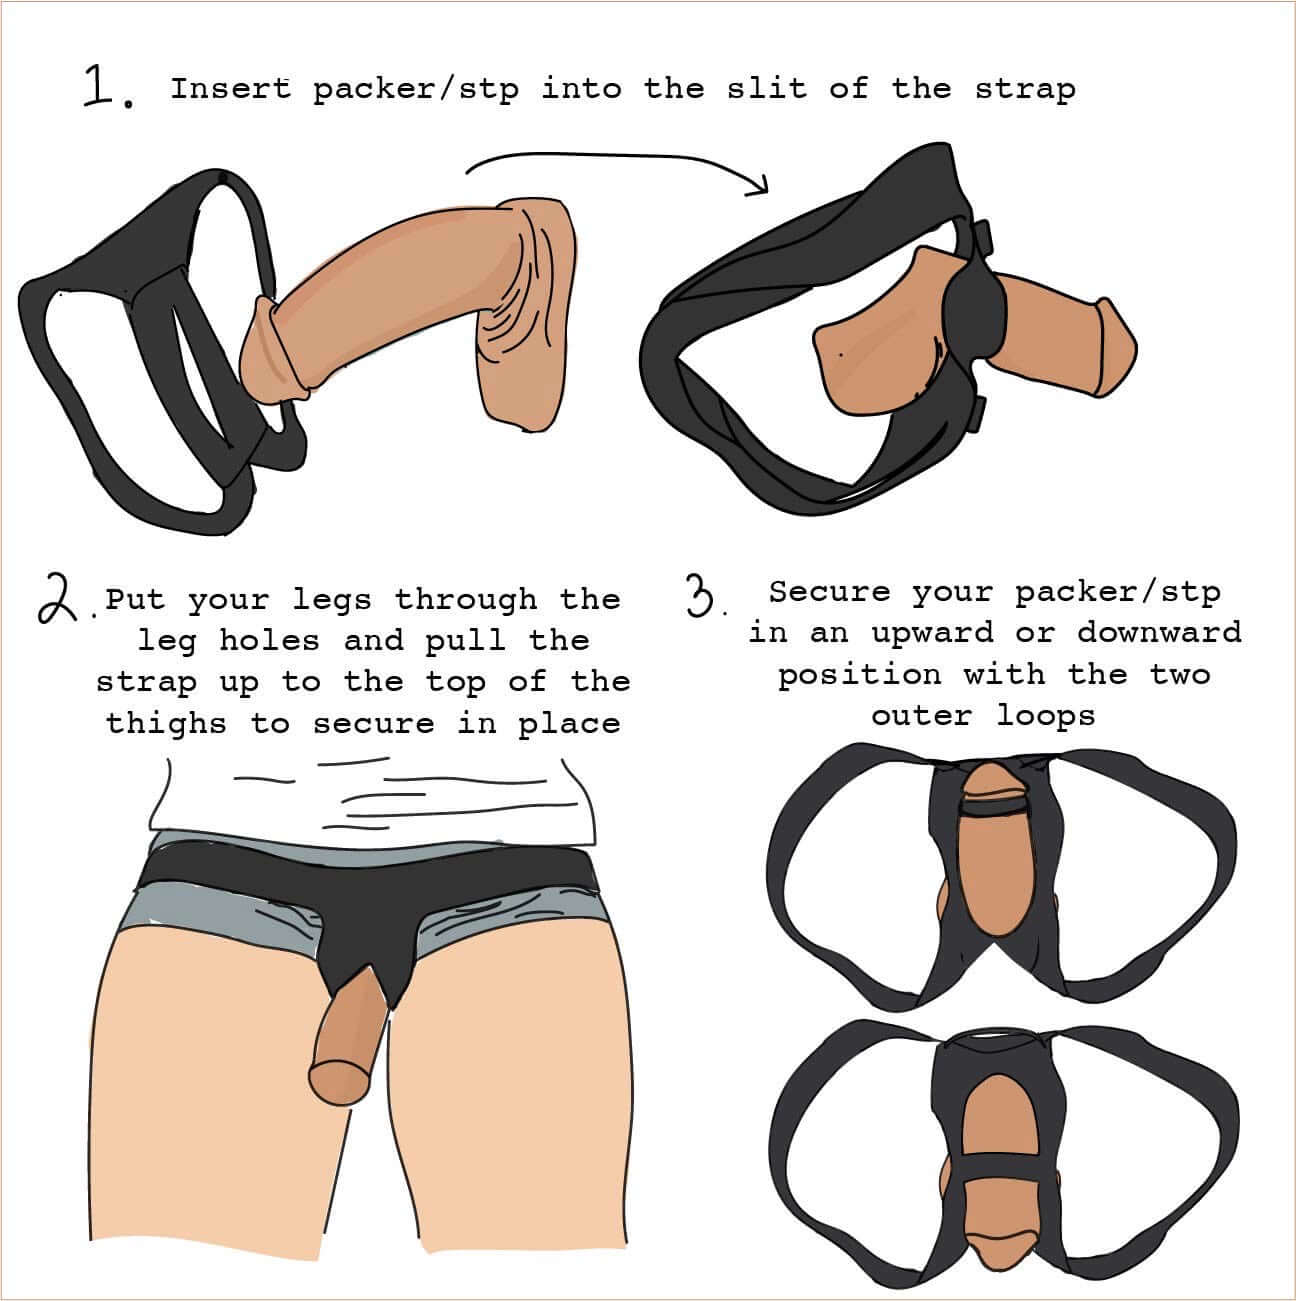 NYTC Harness for Packers & StPs